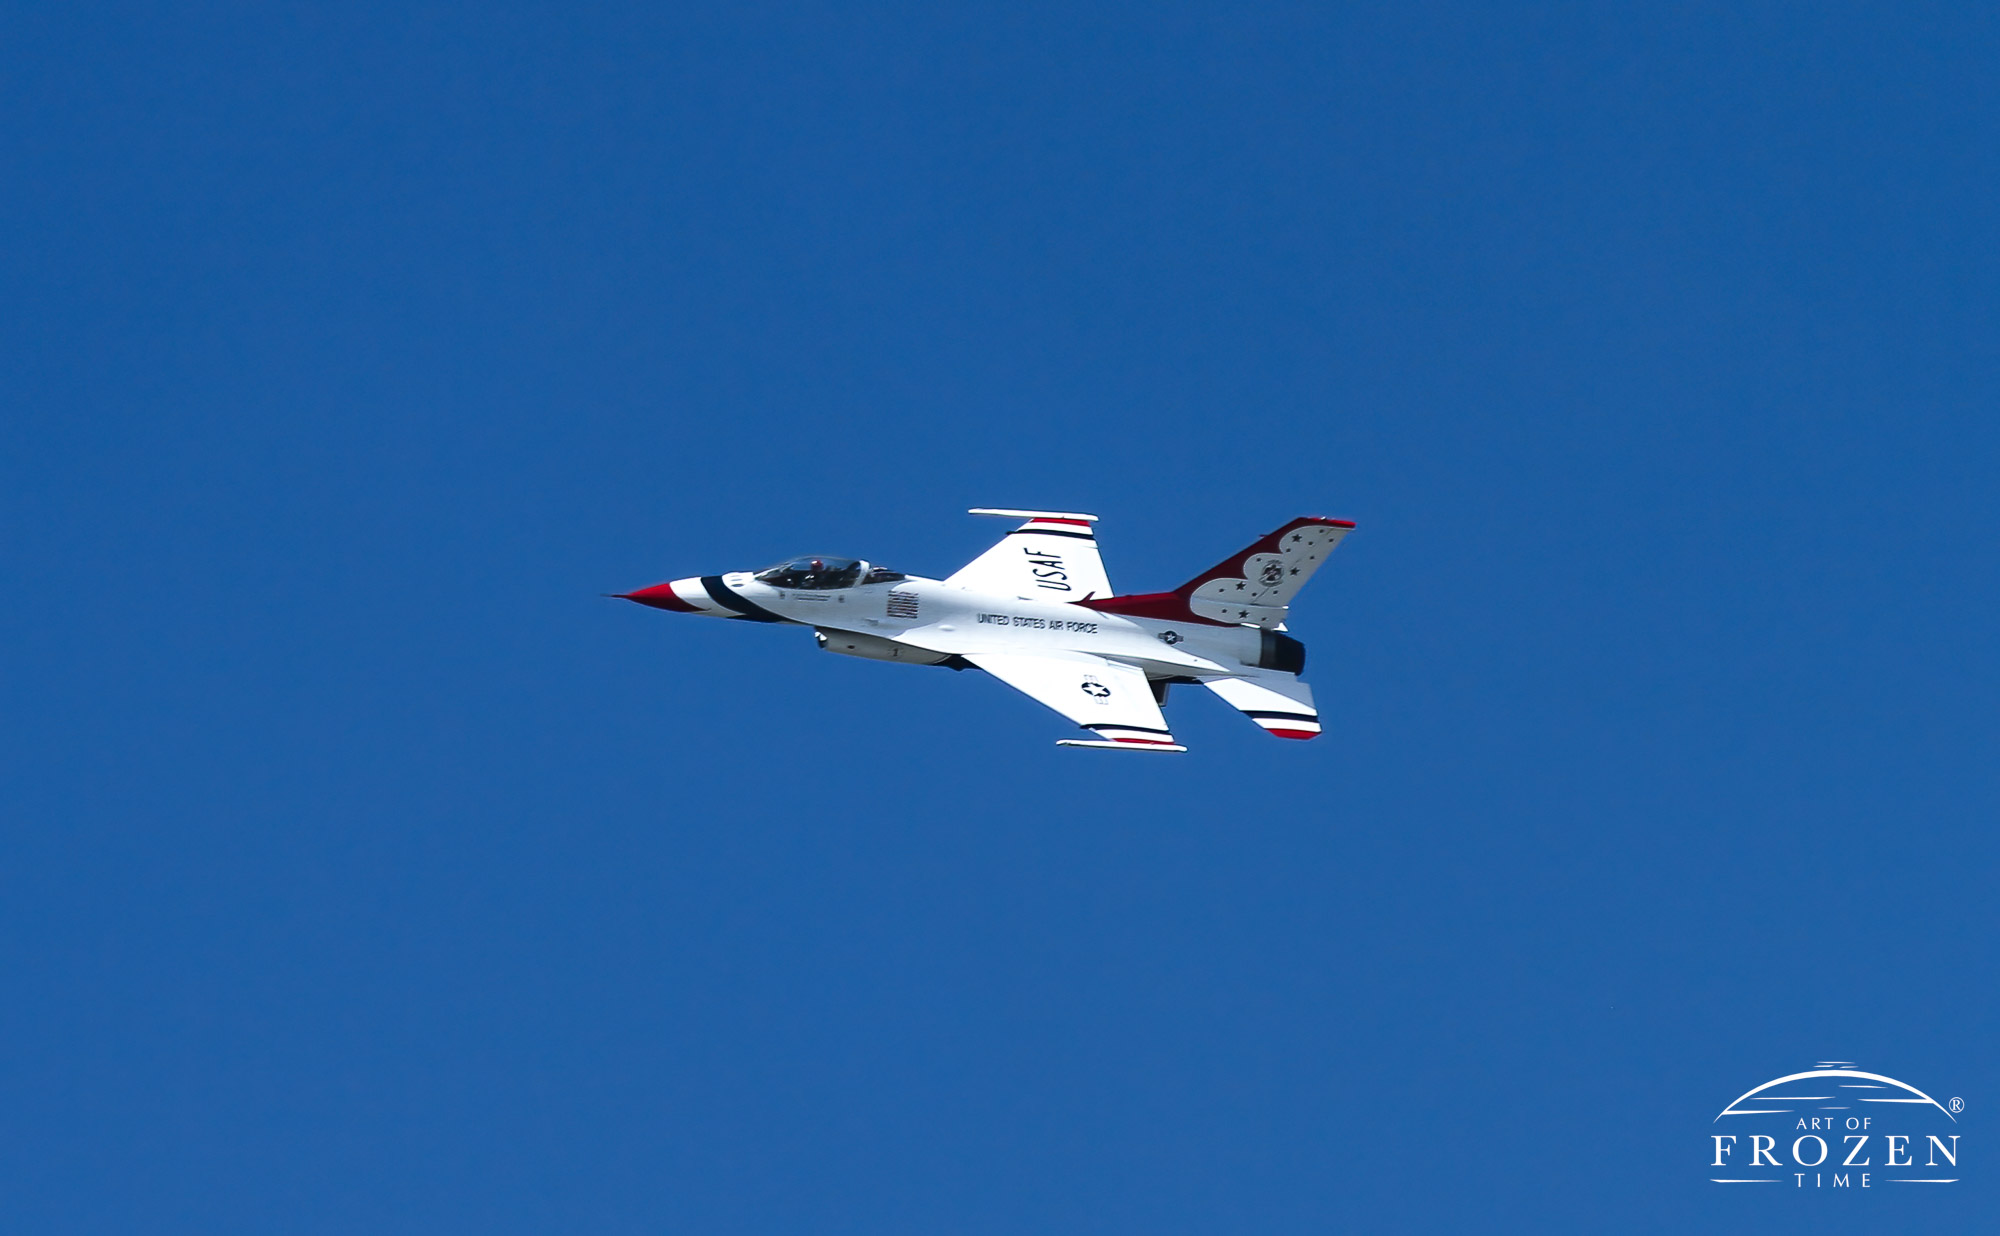 The bright white Air Force Thunderbird finish contrasts with burning blue sky during an airshow flyby